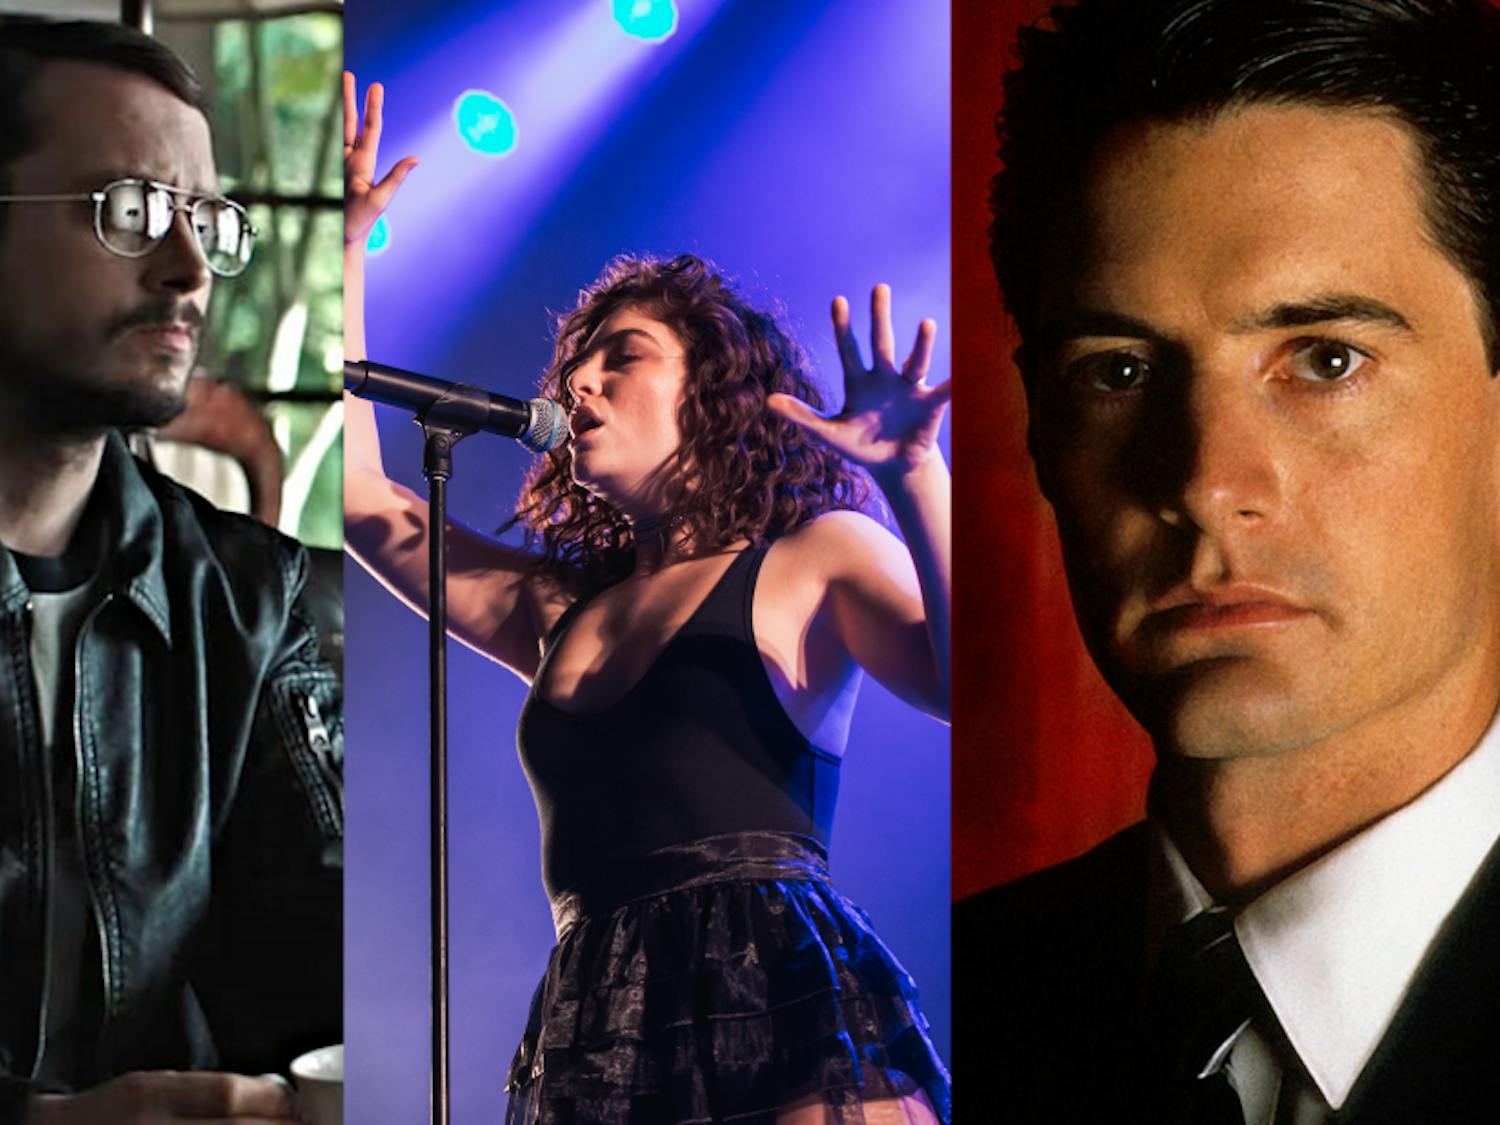 Pictured from left to right, Elijah Wood in "I Don't Feel at Home in This World Anymore," Lorde performing in July and Kyle MacLachlan as Agent Dale Cooper in the original run of "Twin Peaks."